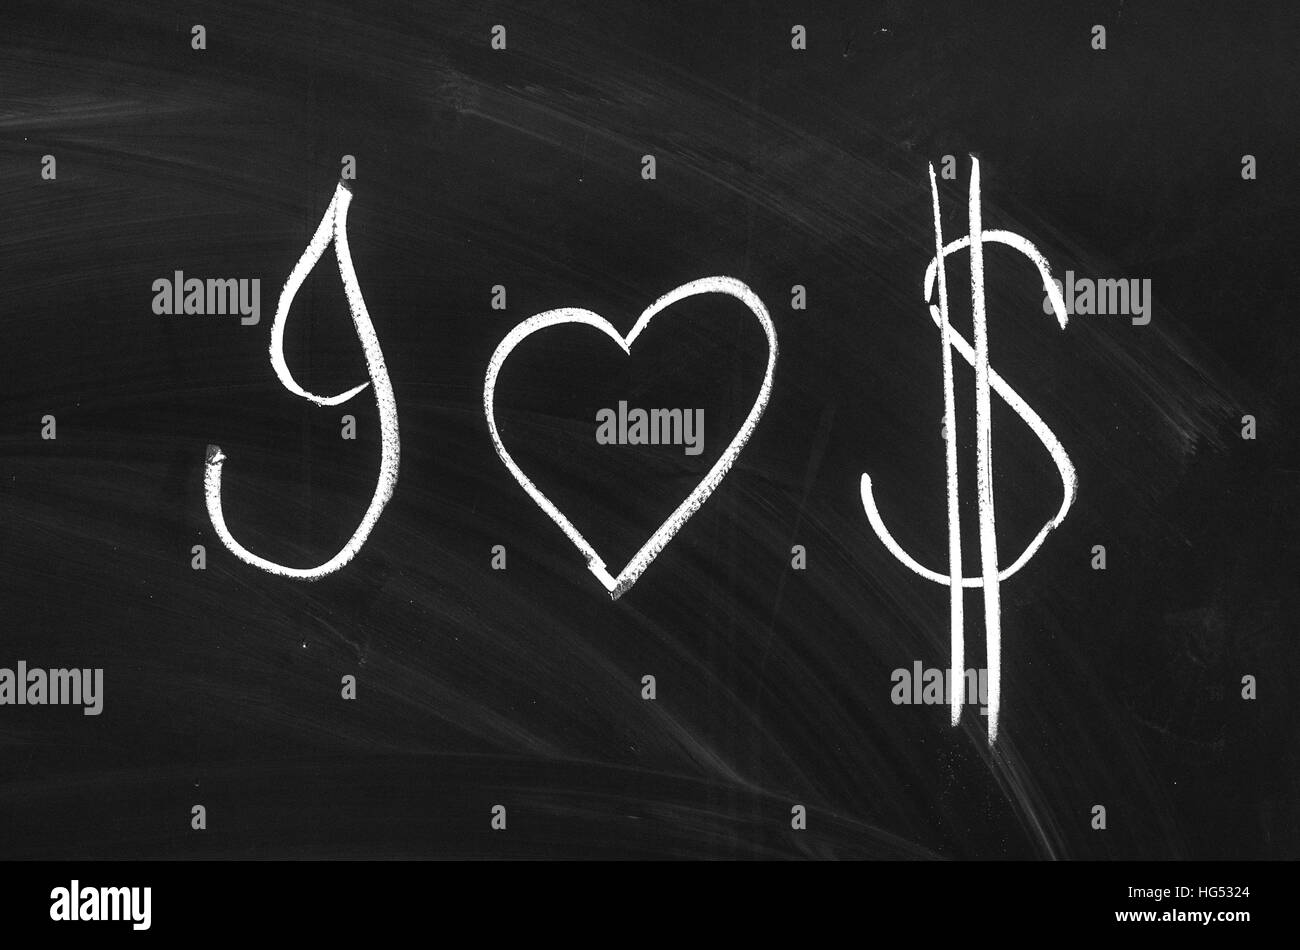 Dollar sign and heart shape drawed on the blackboard Stock Photo